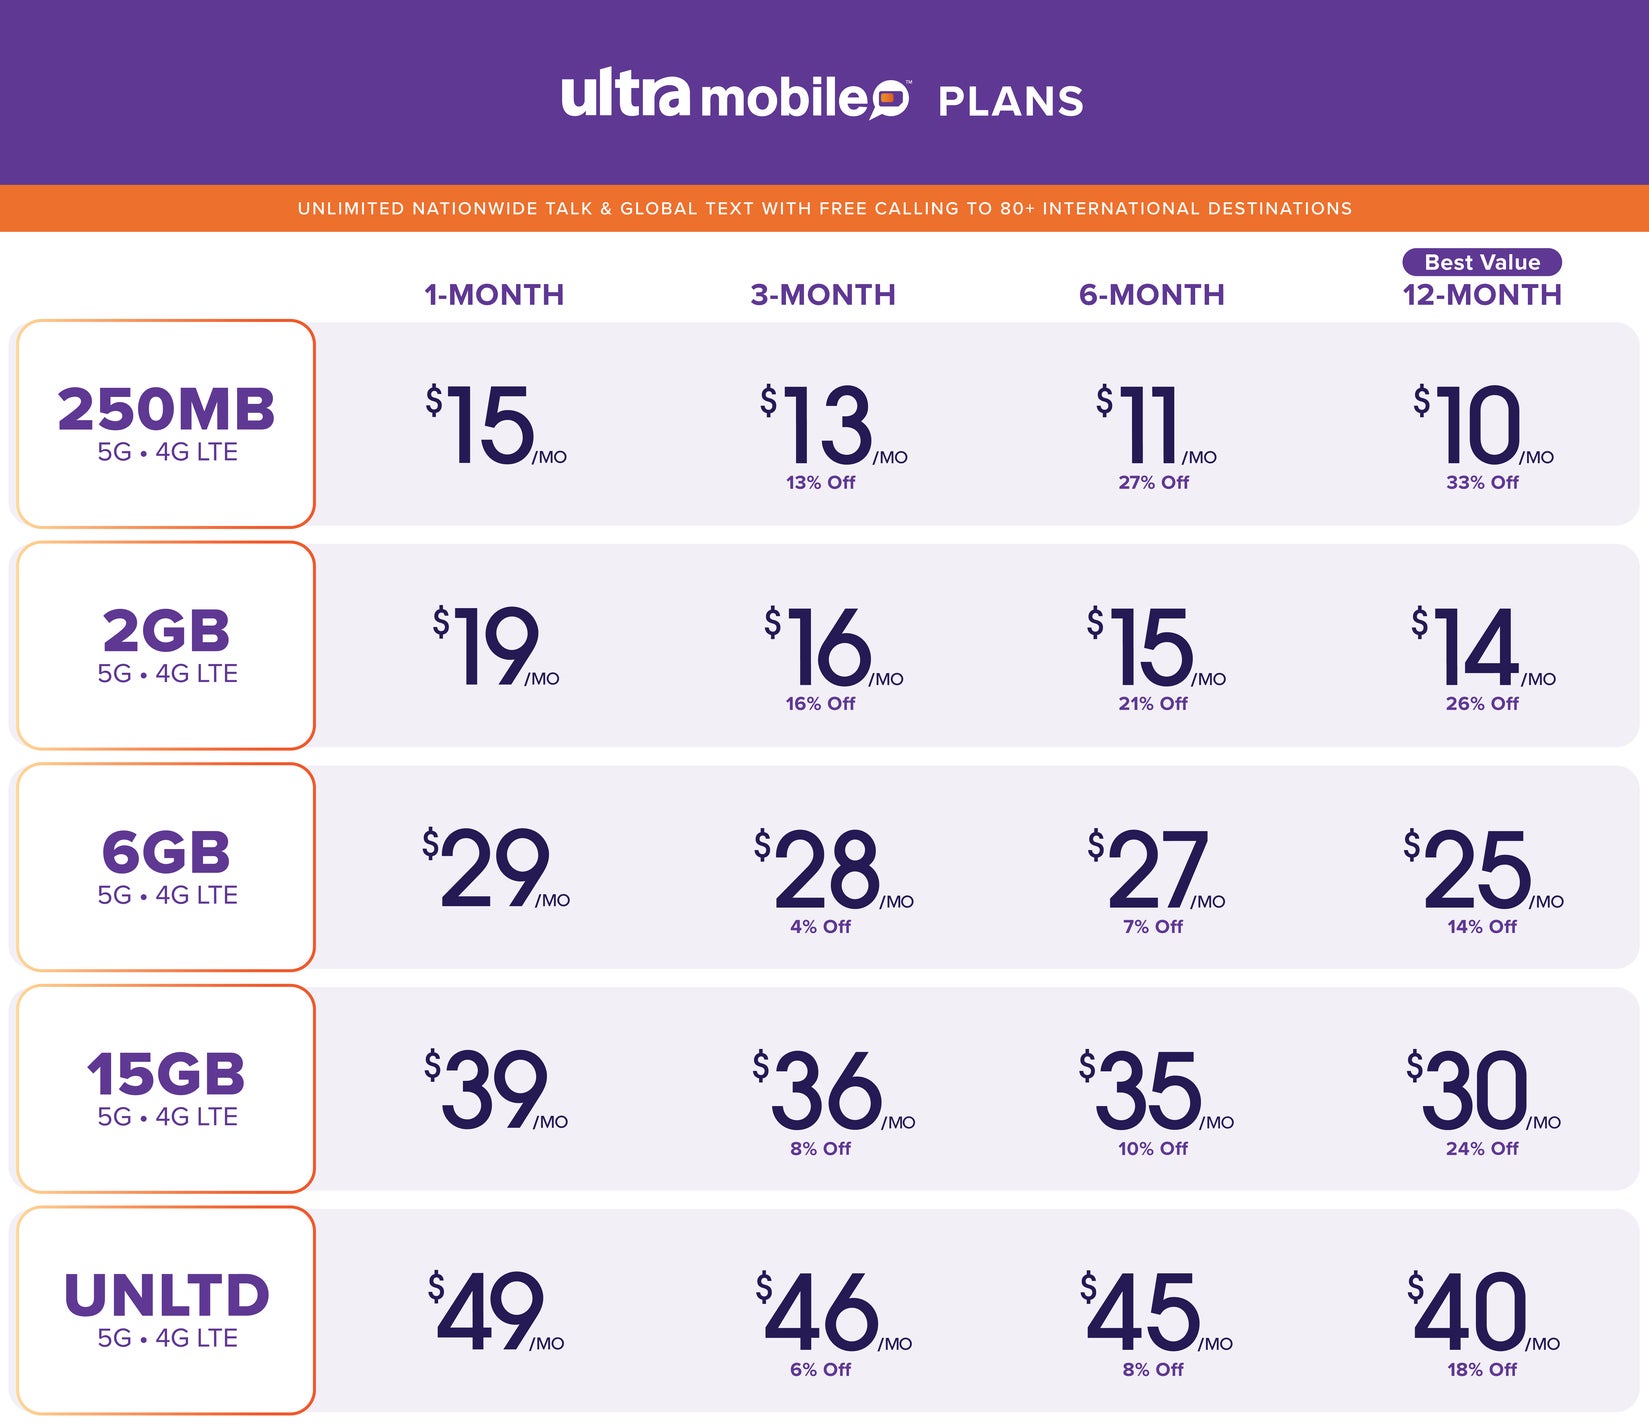 All Ultra Mobile plans pricing - Ultra Mobile reclaims your phone bill freedom on America's largest 5G network!